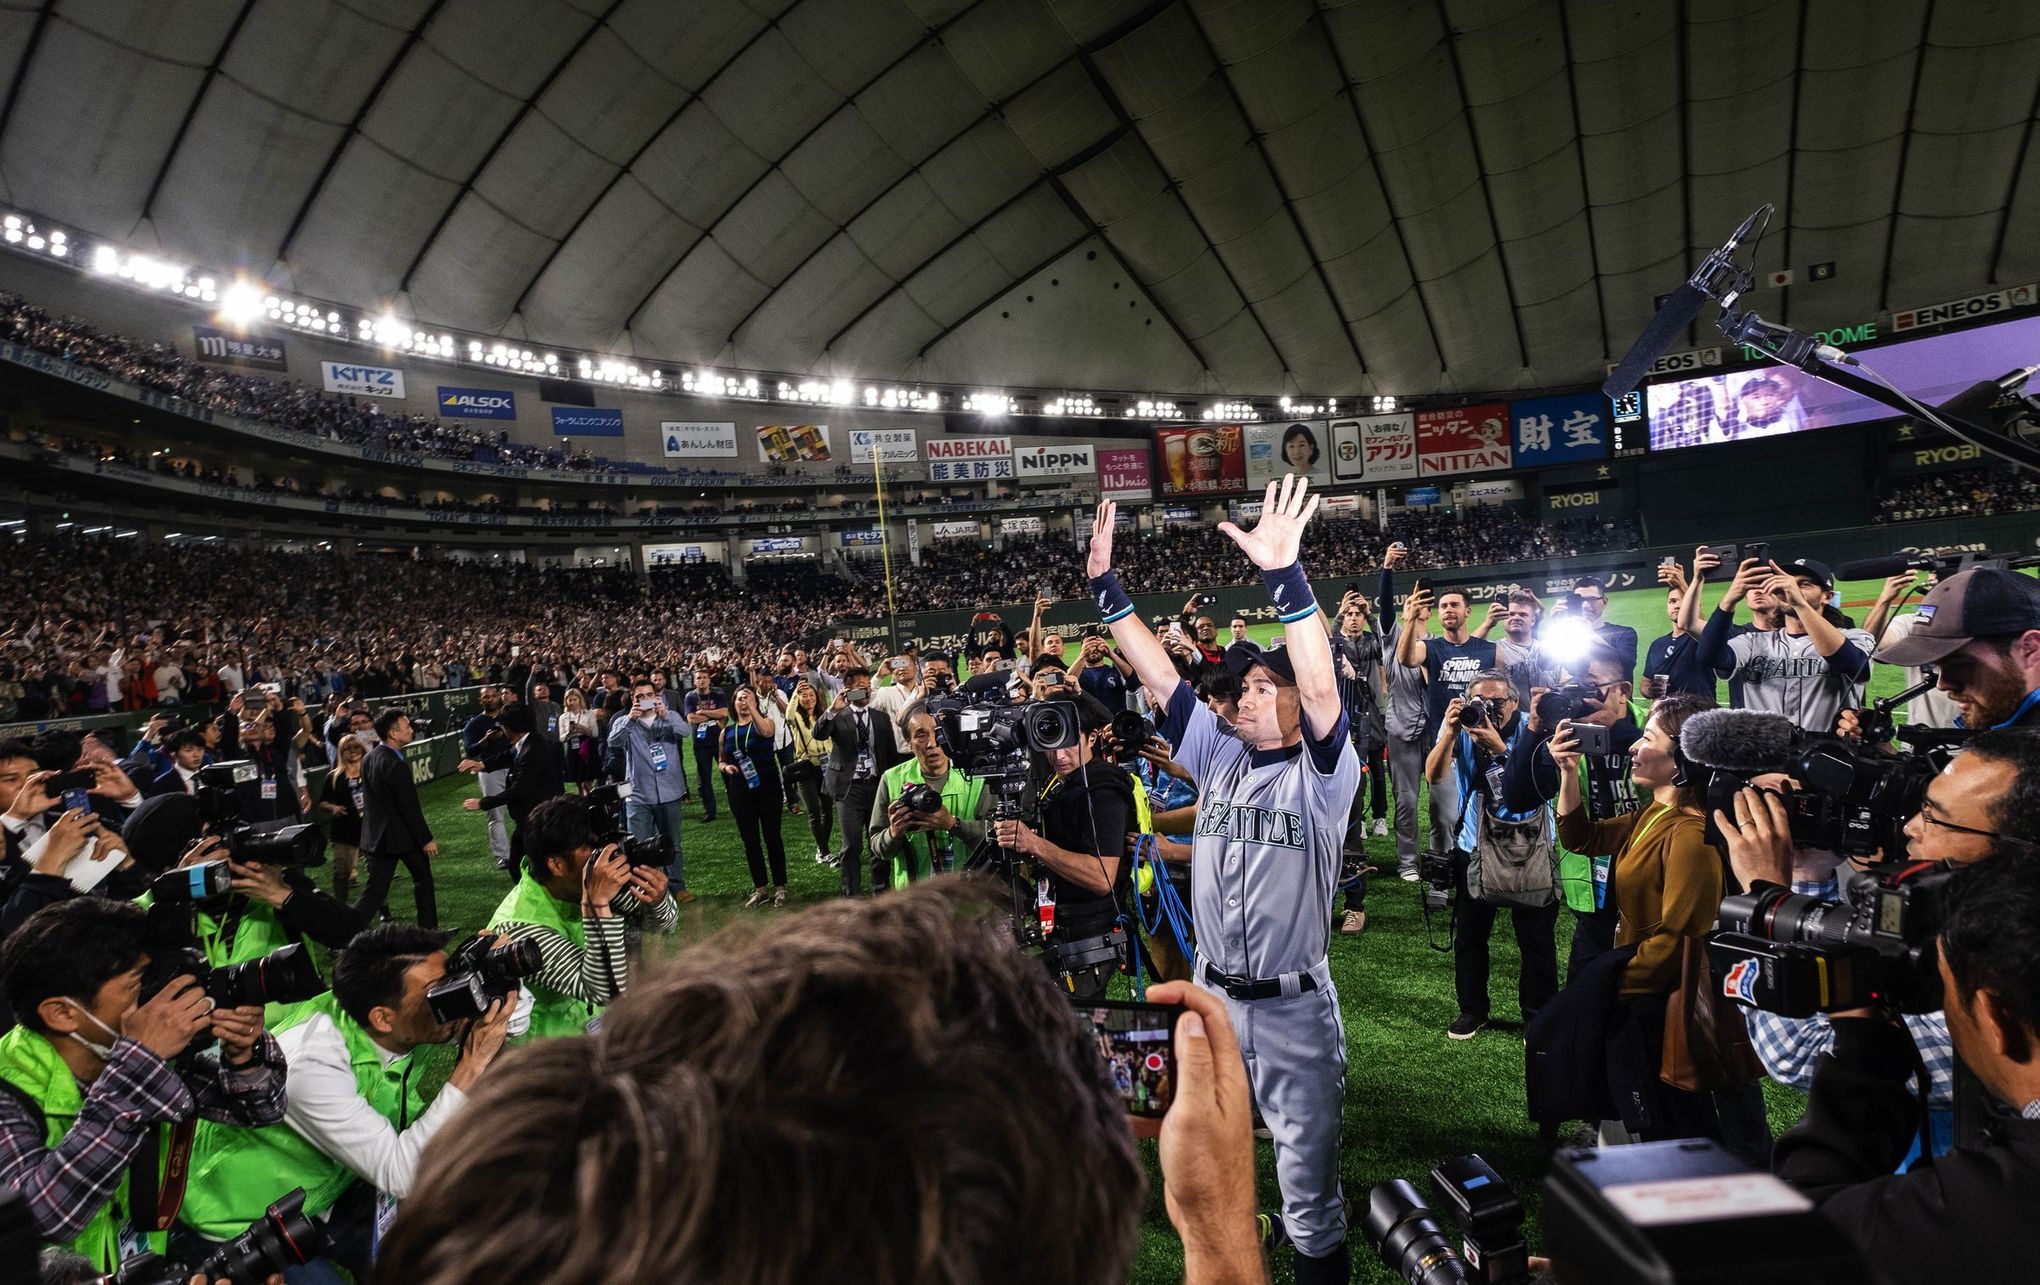 Ichiro says goodbye to adoring fans; Mariners beat A's in 12